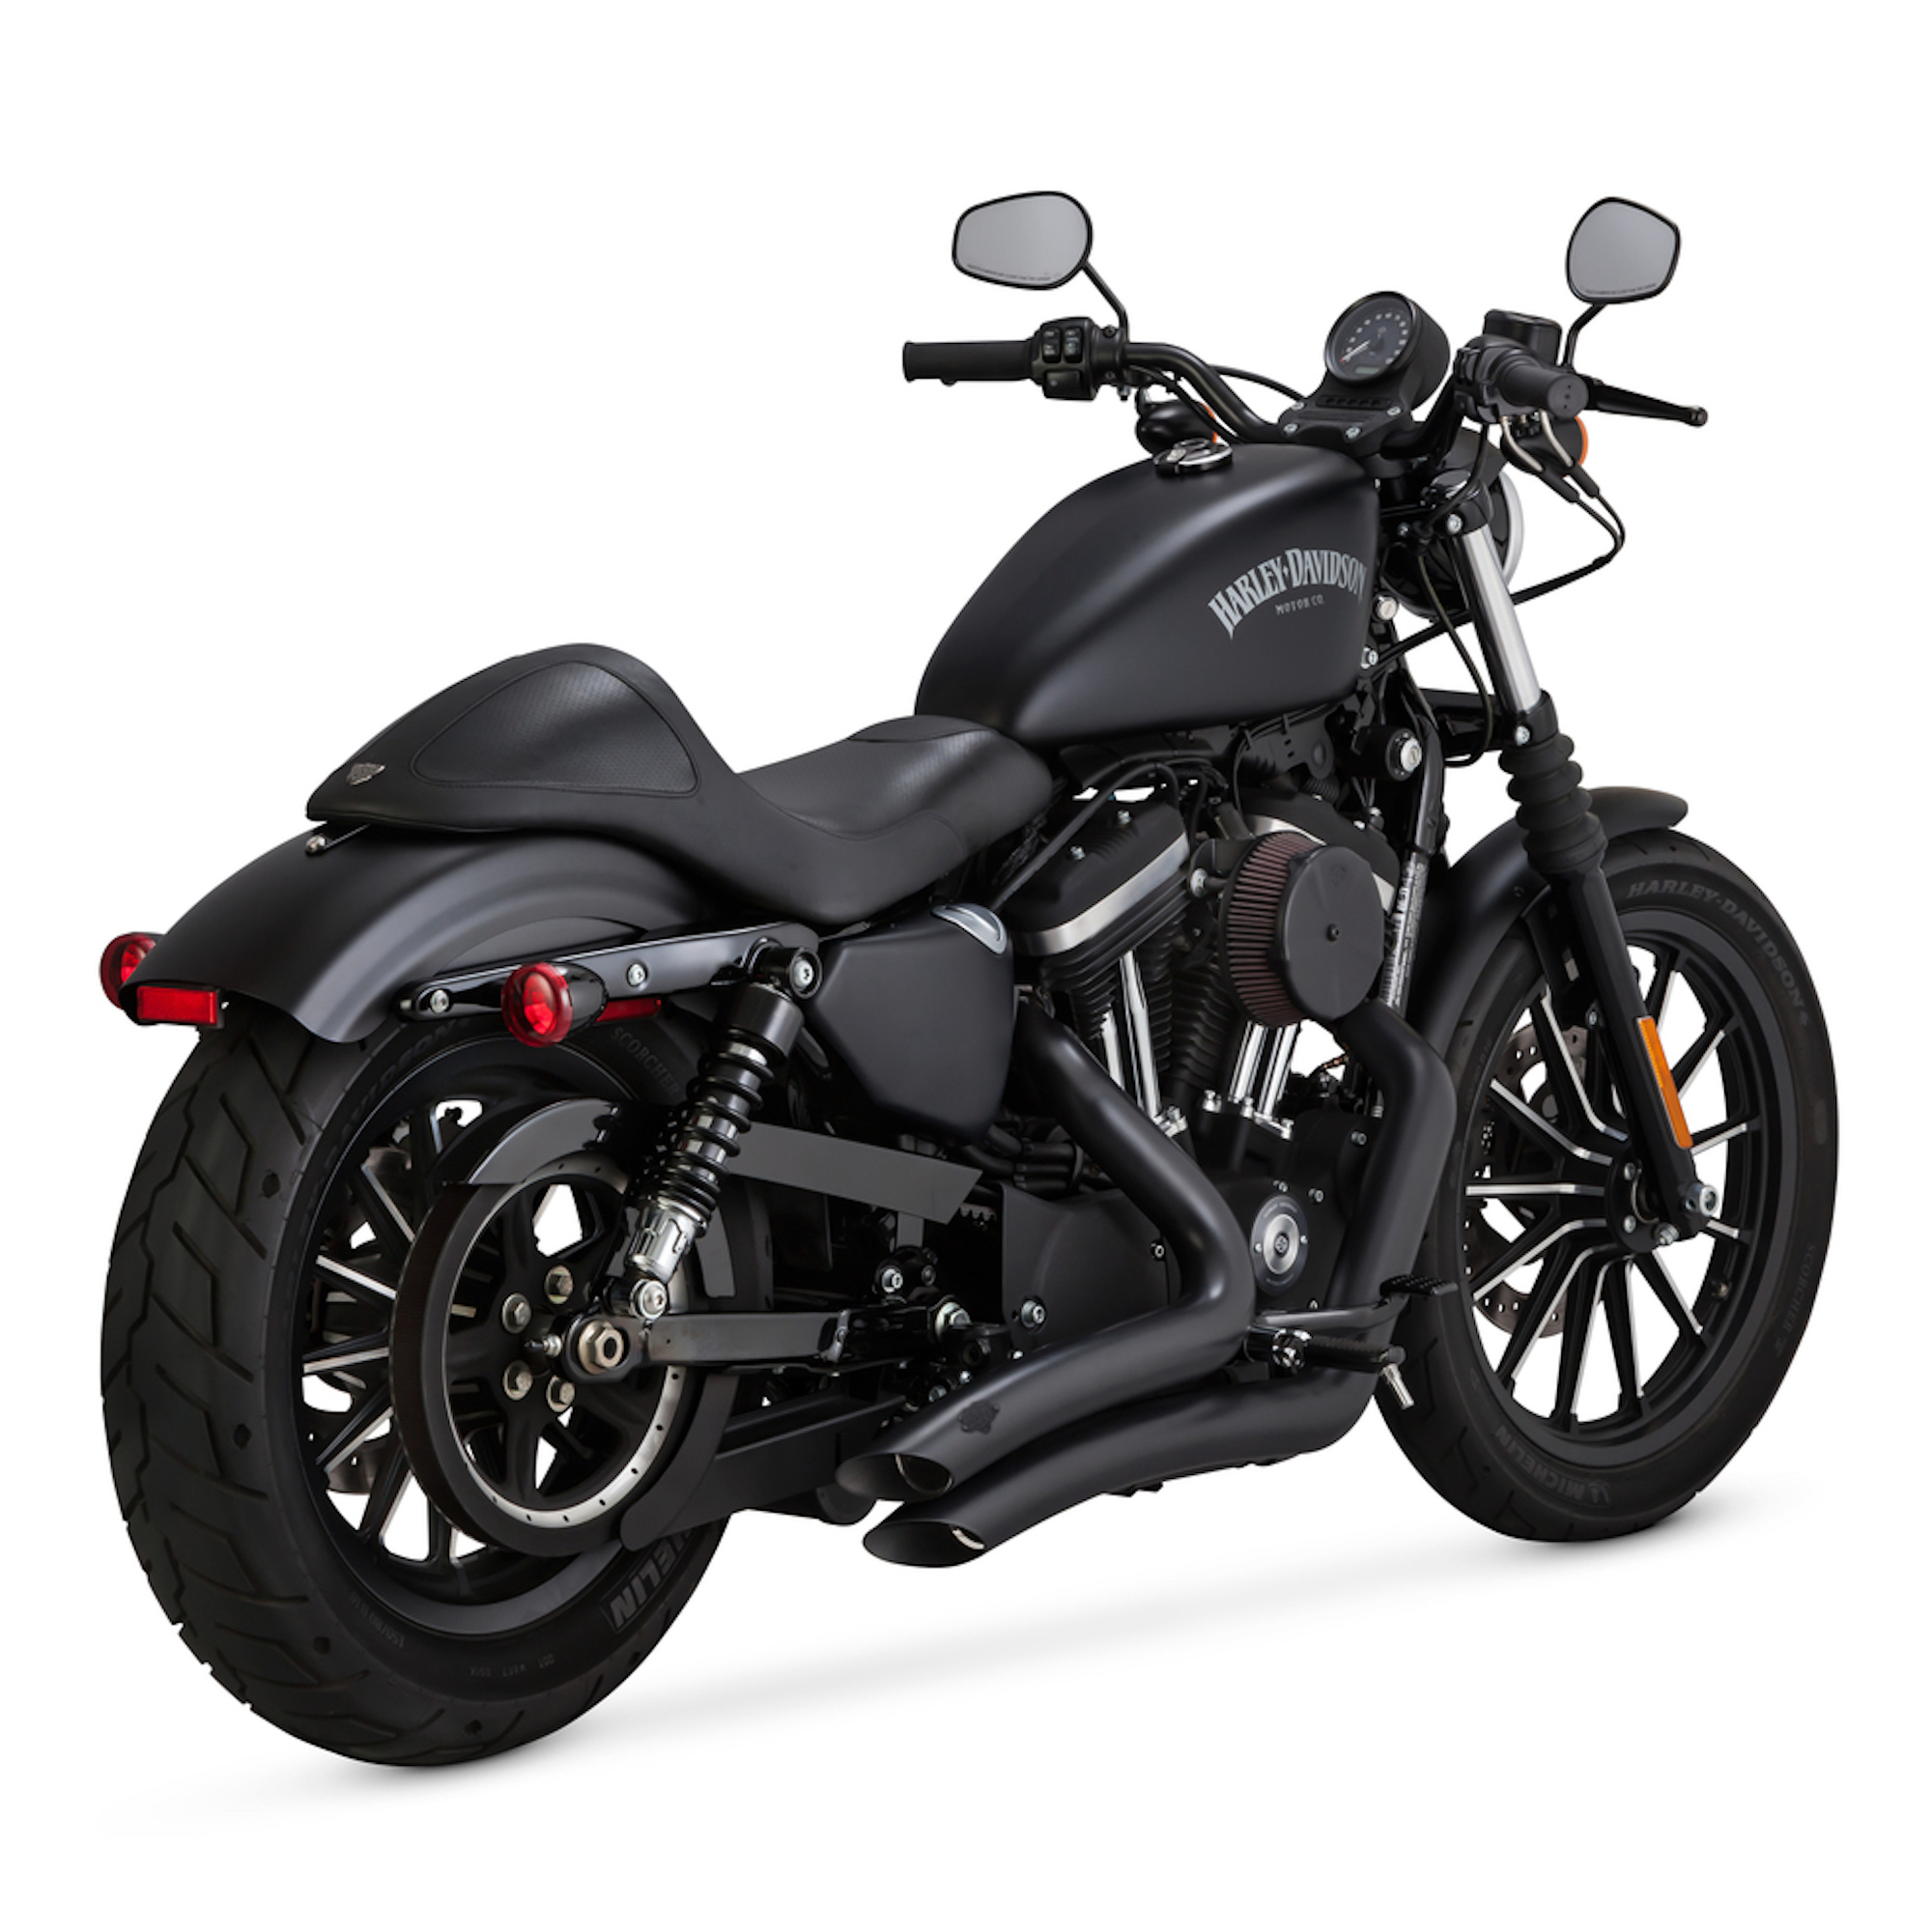 The Vance & Hines PCX Big Radius pipe system. Media sourced from the relevant press release.